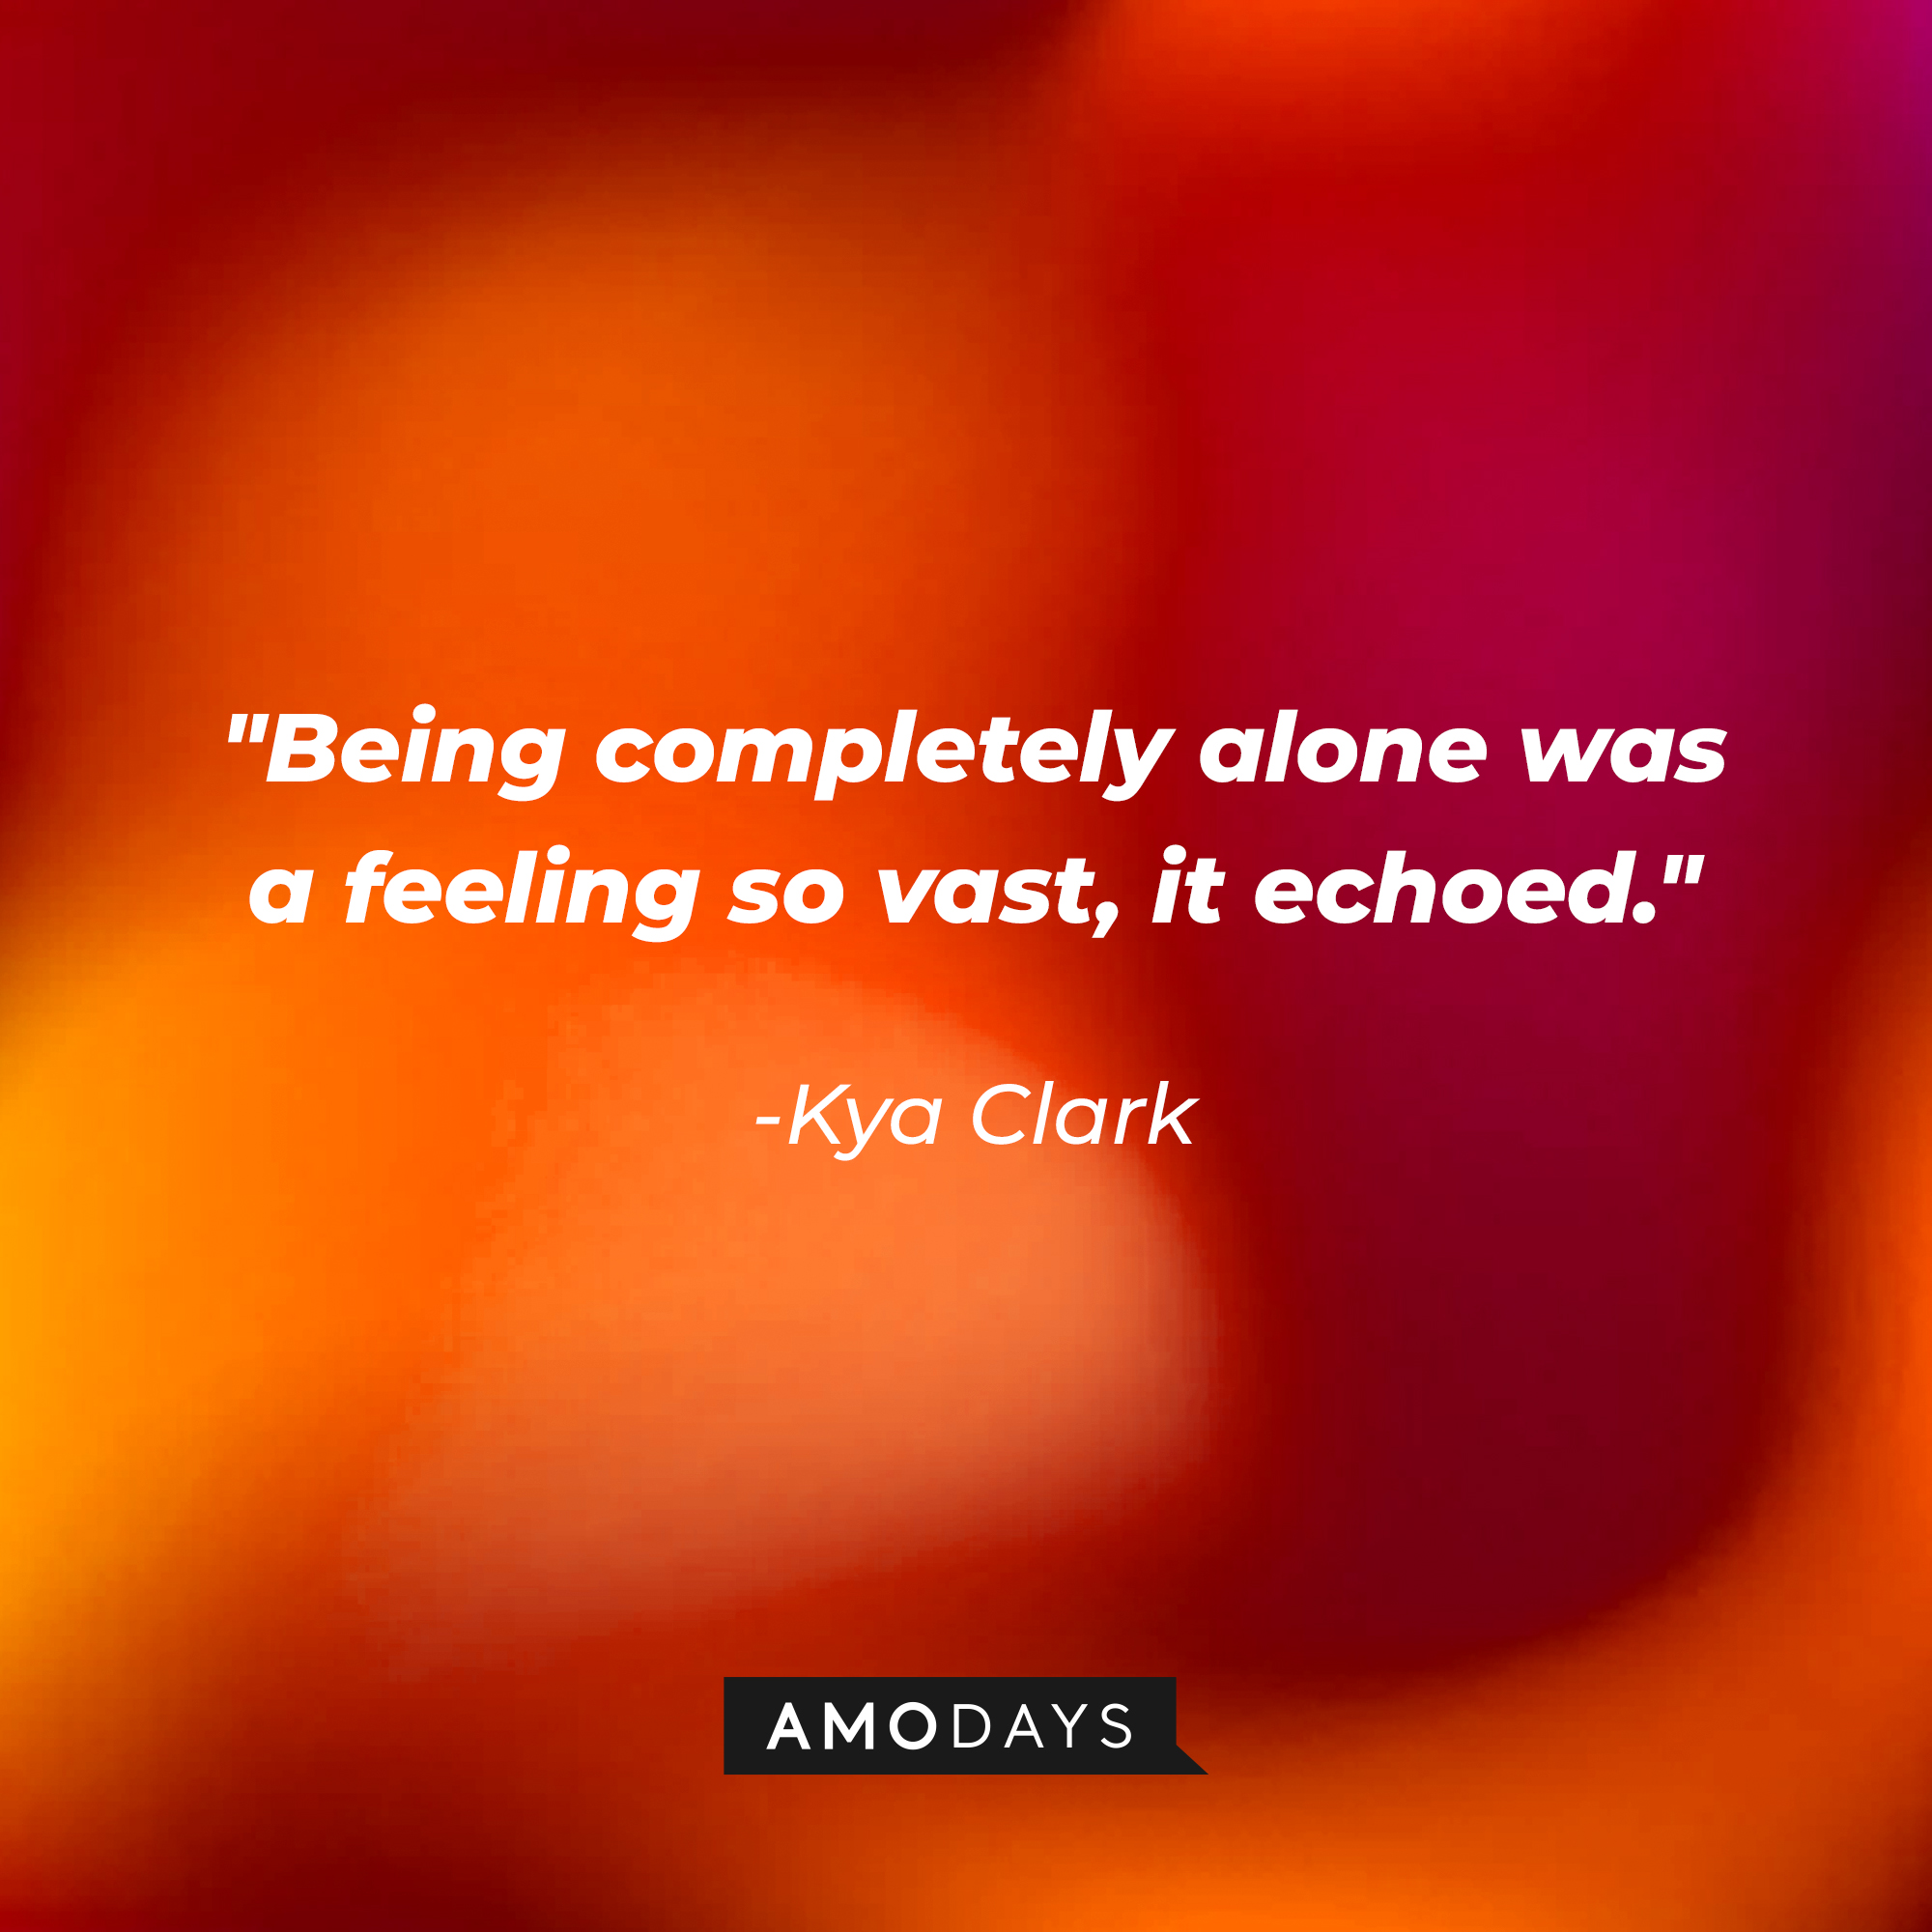 Kya Clark’s quote: “Being completely alone was a feeling so vast, it echoed.”│Source: AmoDays